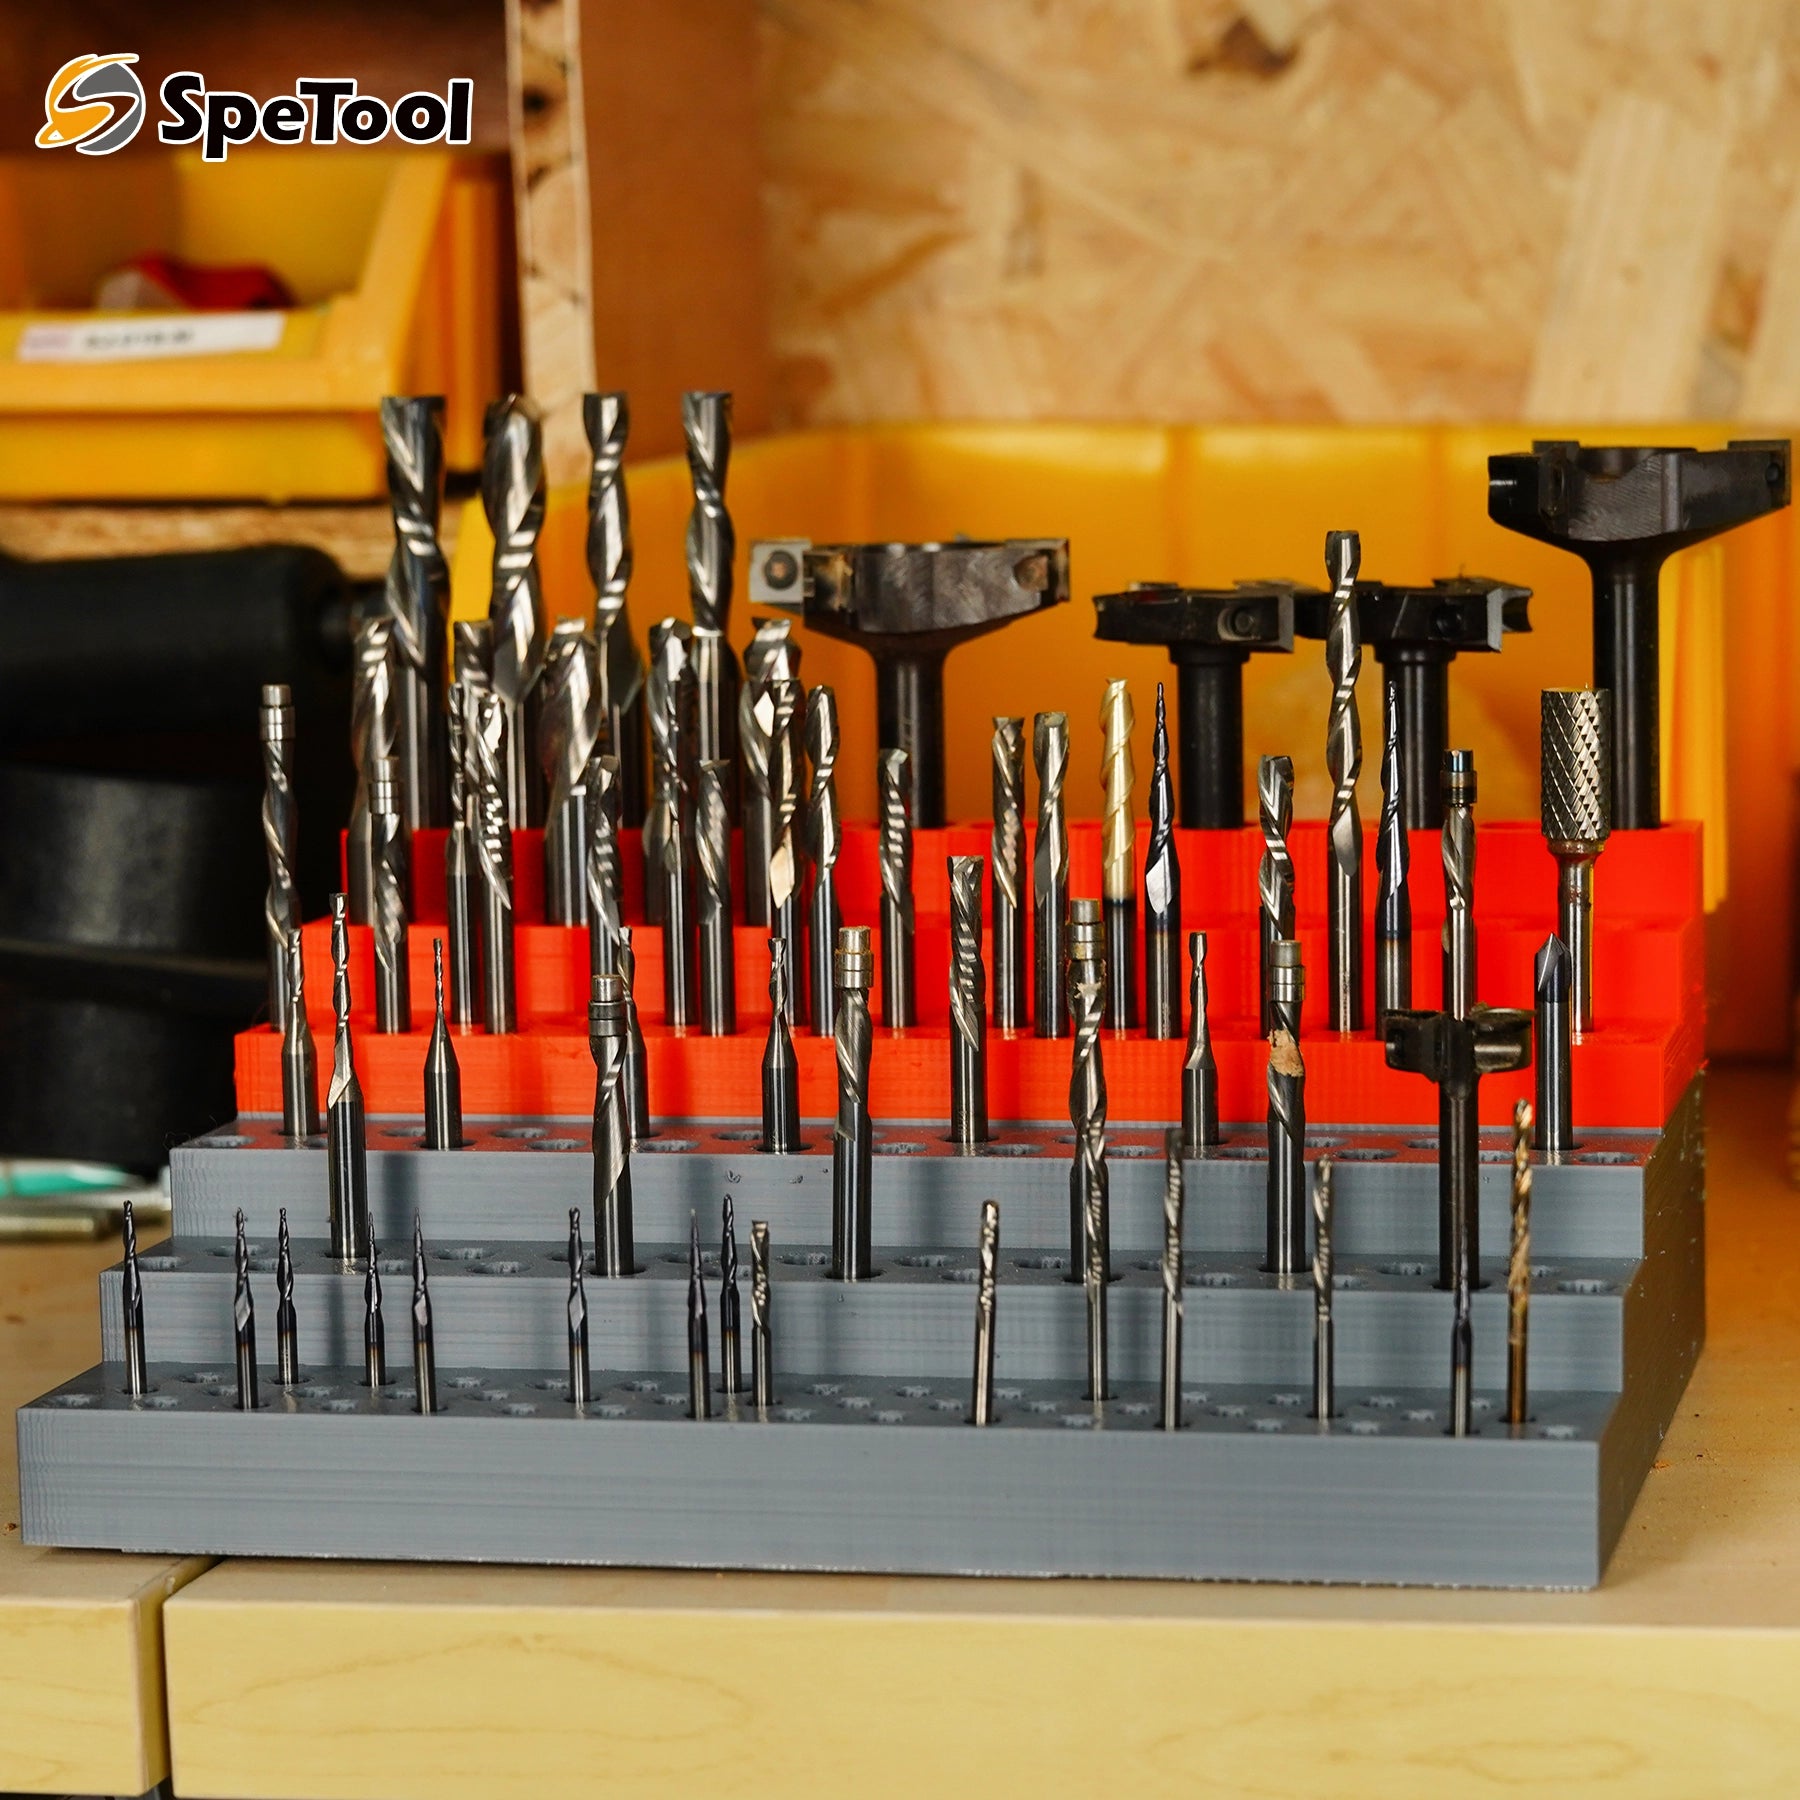 3D printed router bit holder -Round hole